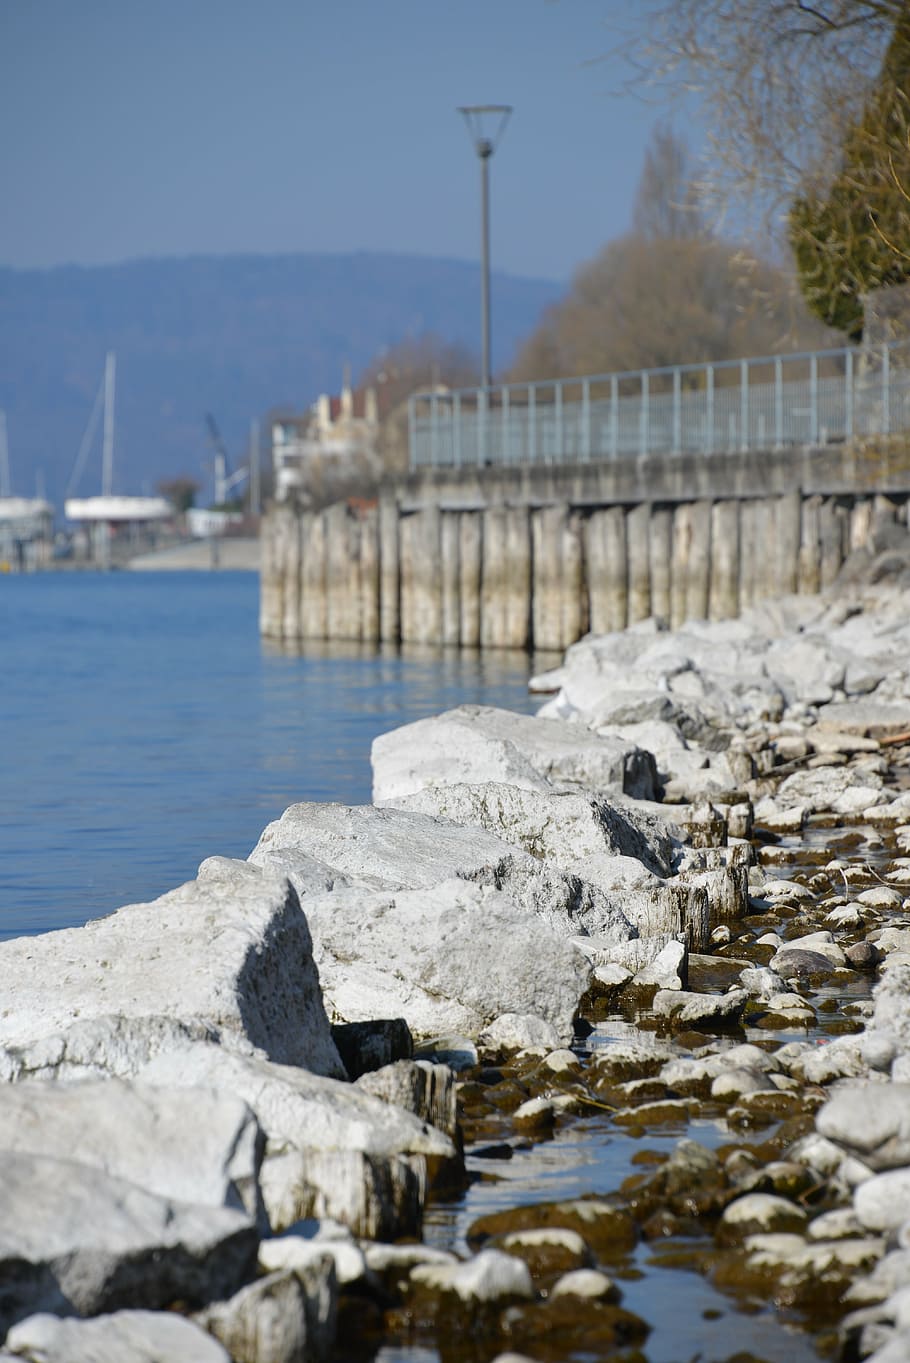 lake constance, water, beach, stones, architecture, built structure, nature, day, building exterior, winter